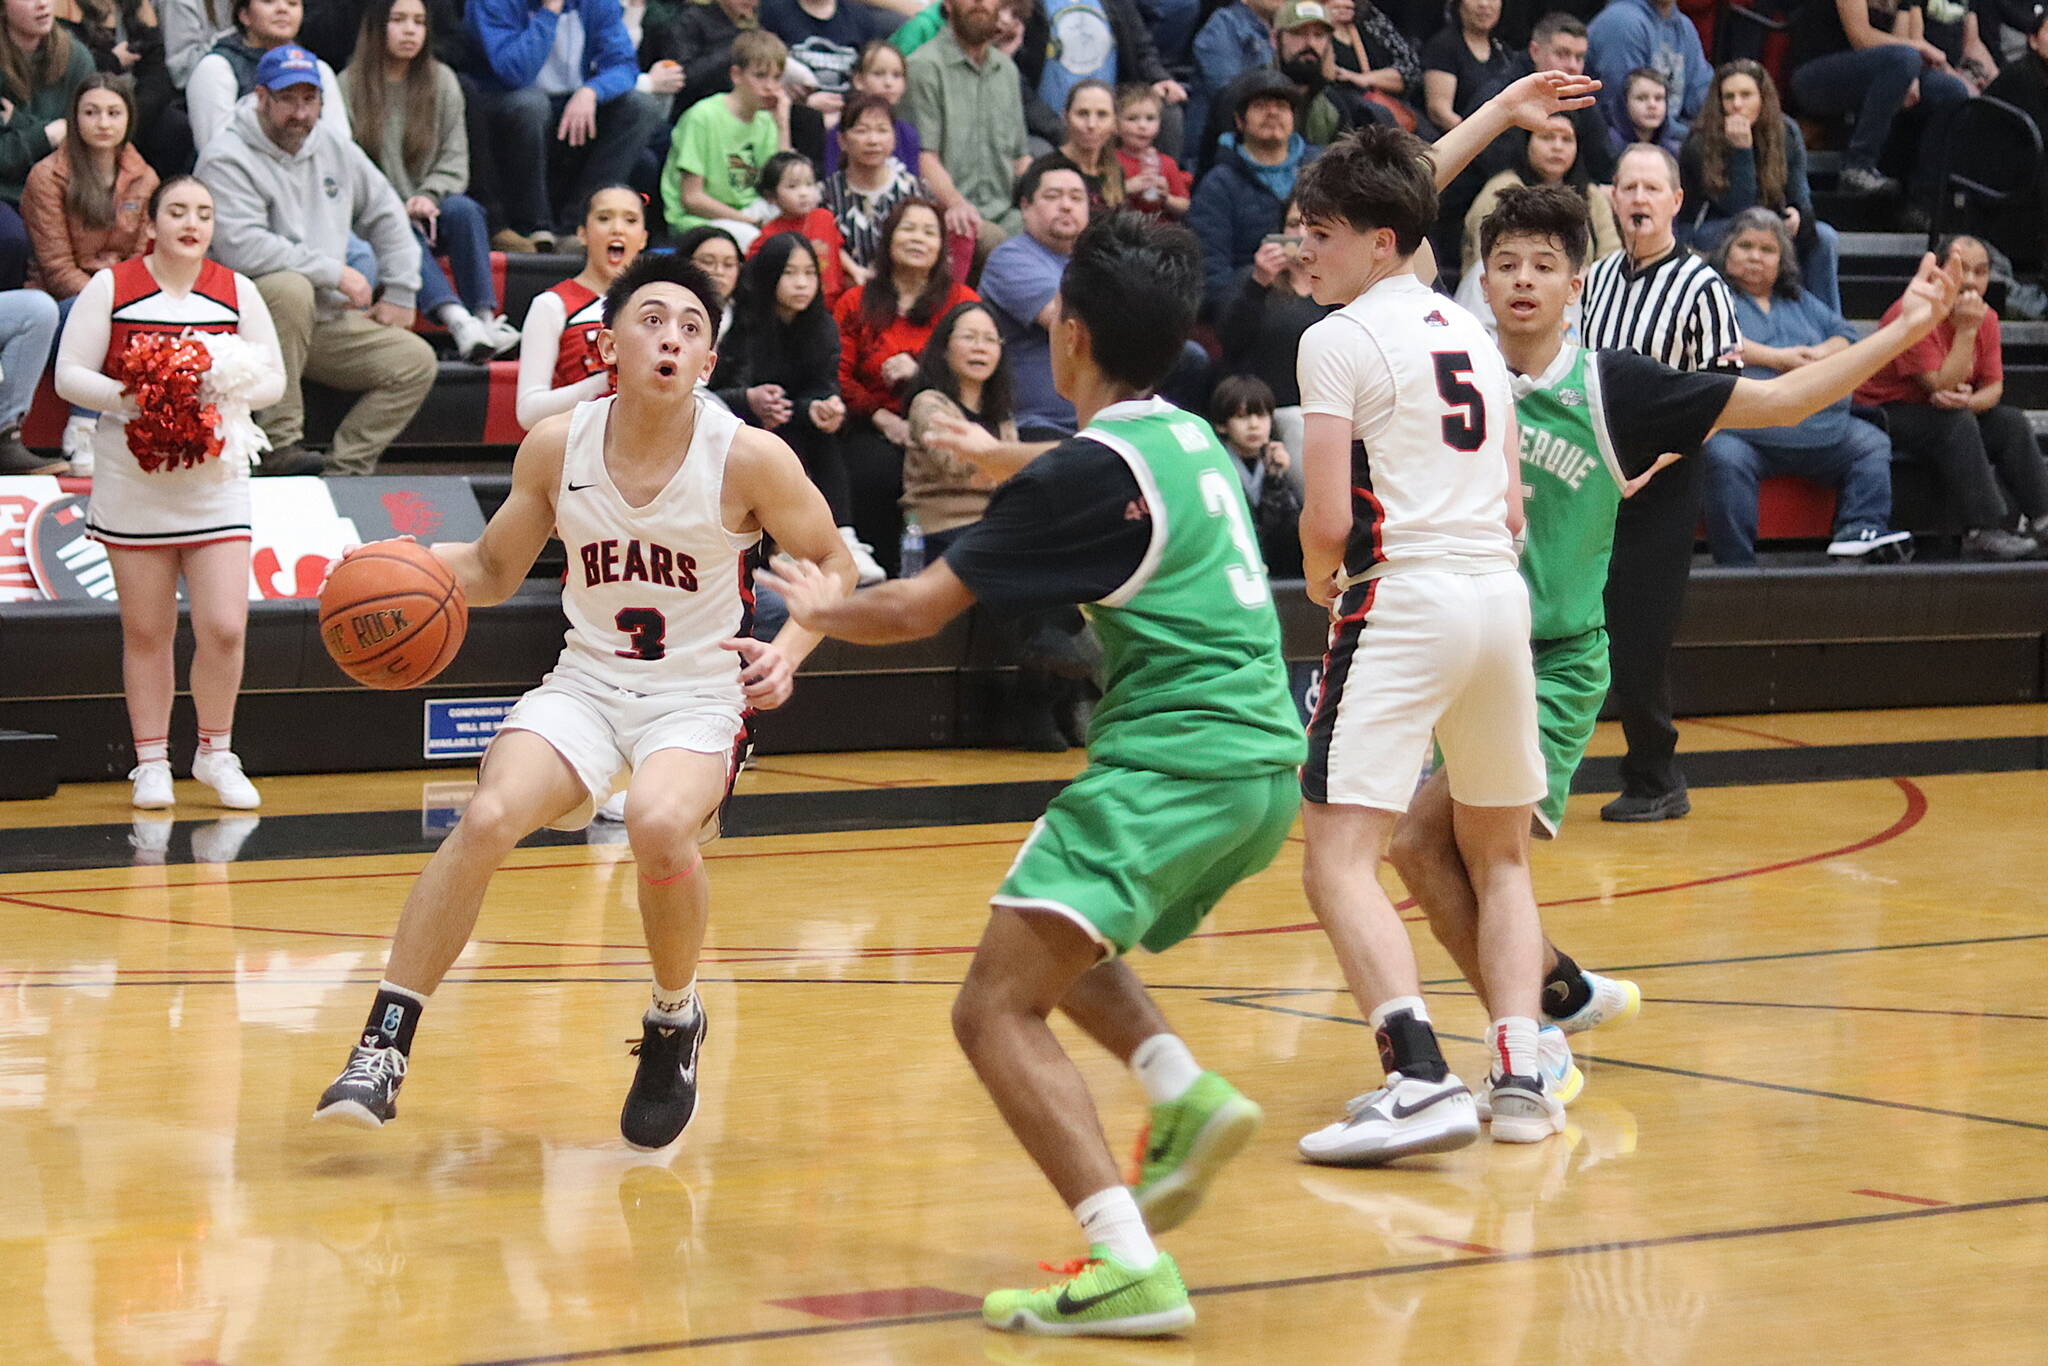 Juneau-Douglas High School: Yadaa.at Kalé guard Alwen Carrillo (#3) looks to drive inside against Albuquerque High School during the final game of the Capital City Classic at JDHS on Saturday night. (Mark Sabbatini / Juneau Empire)